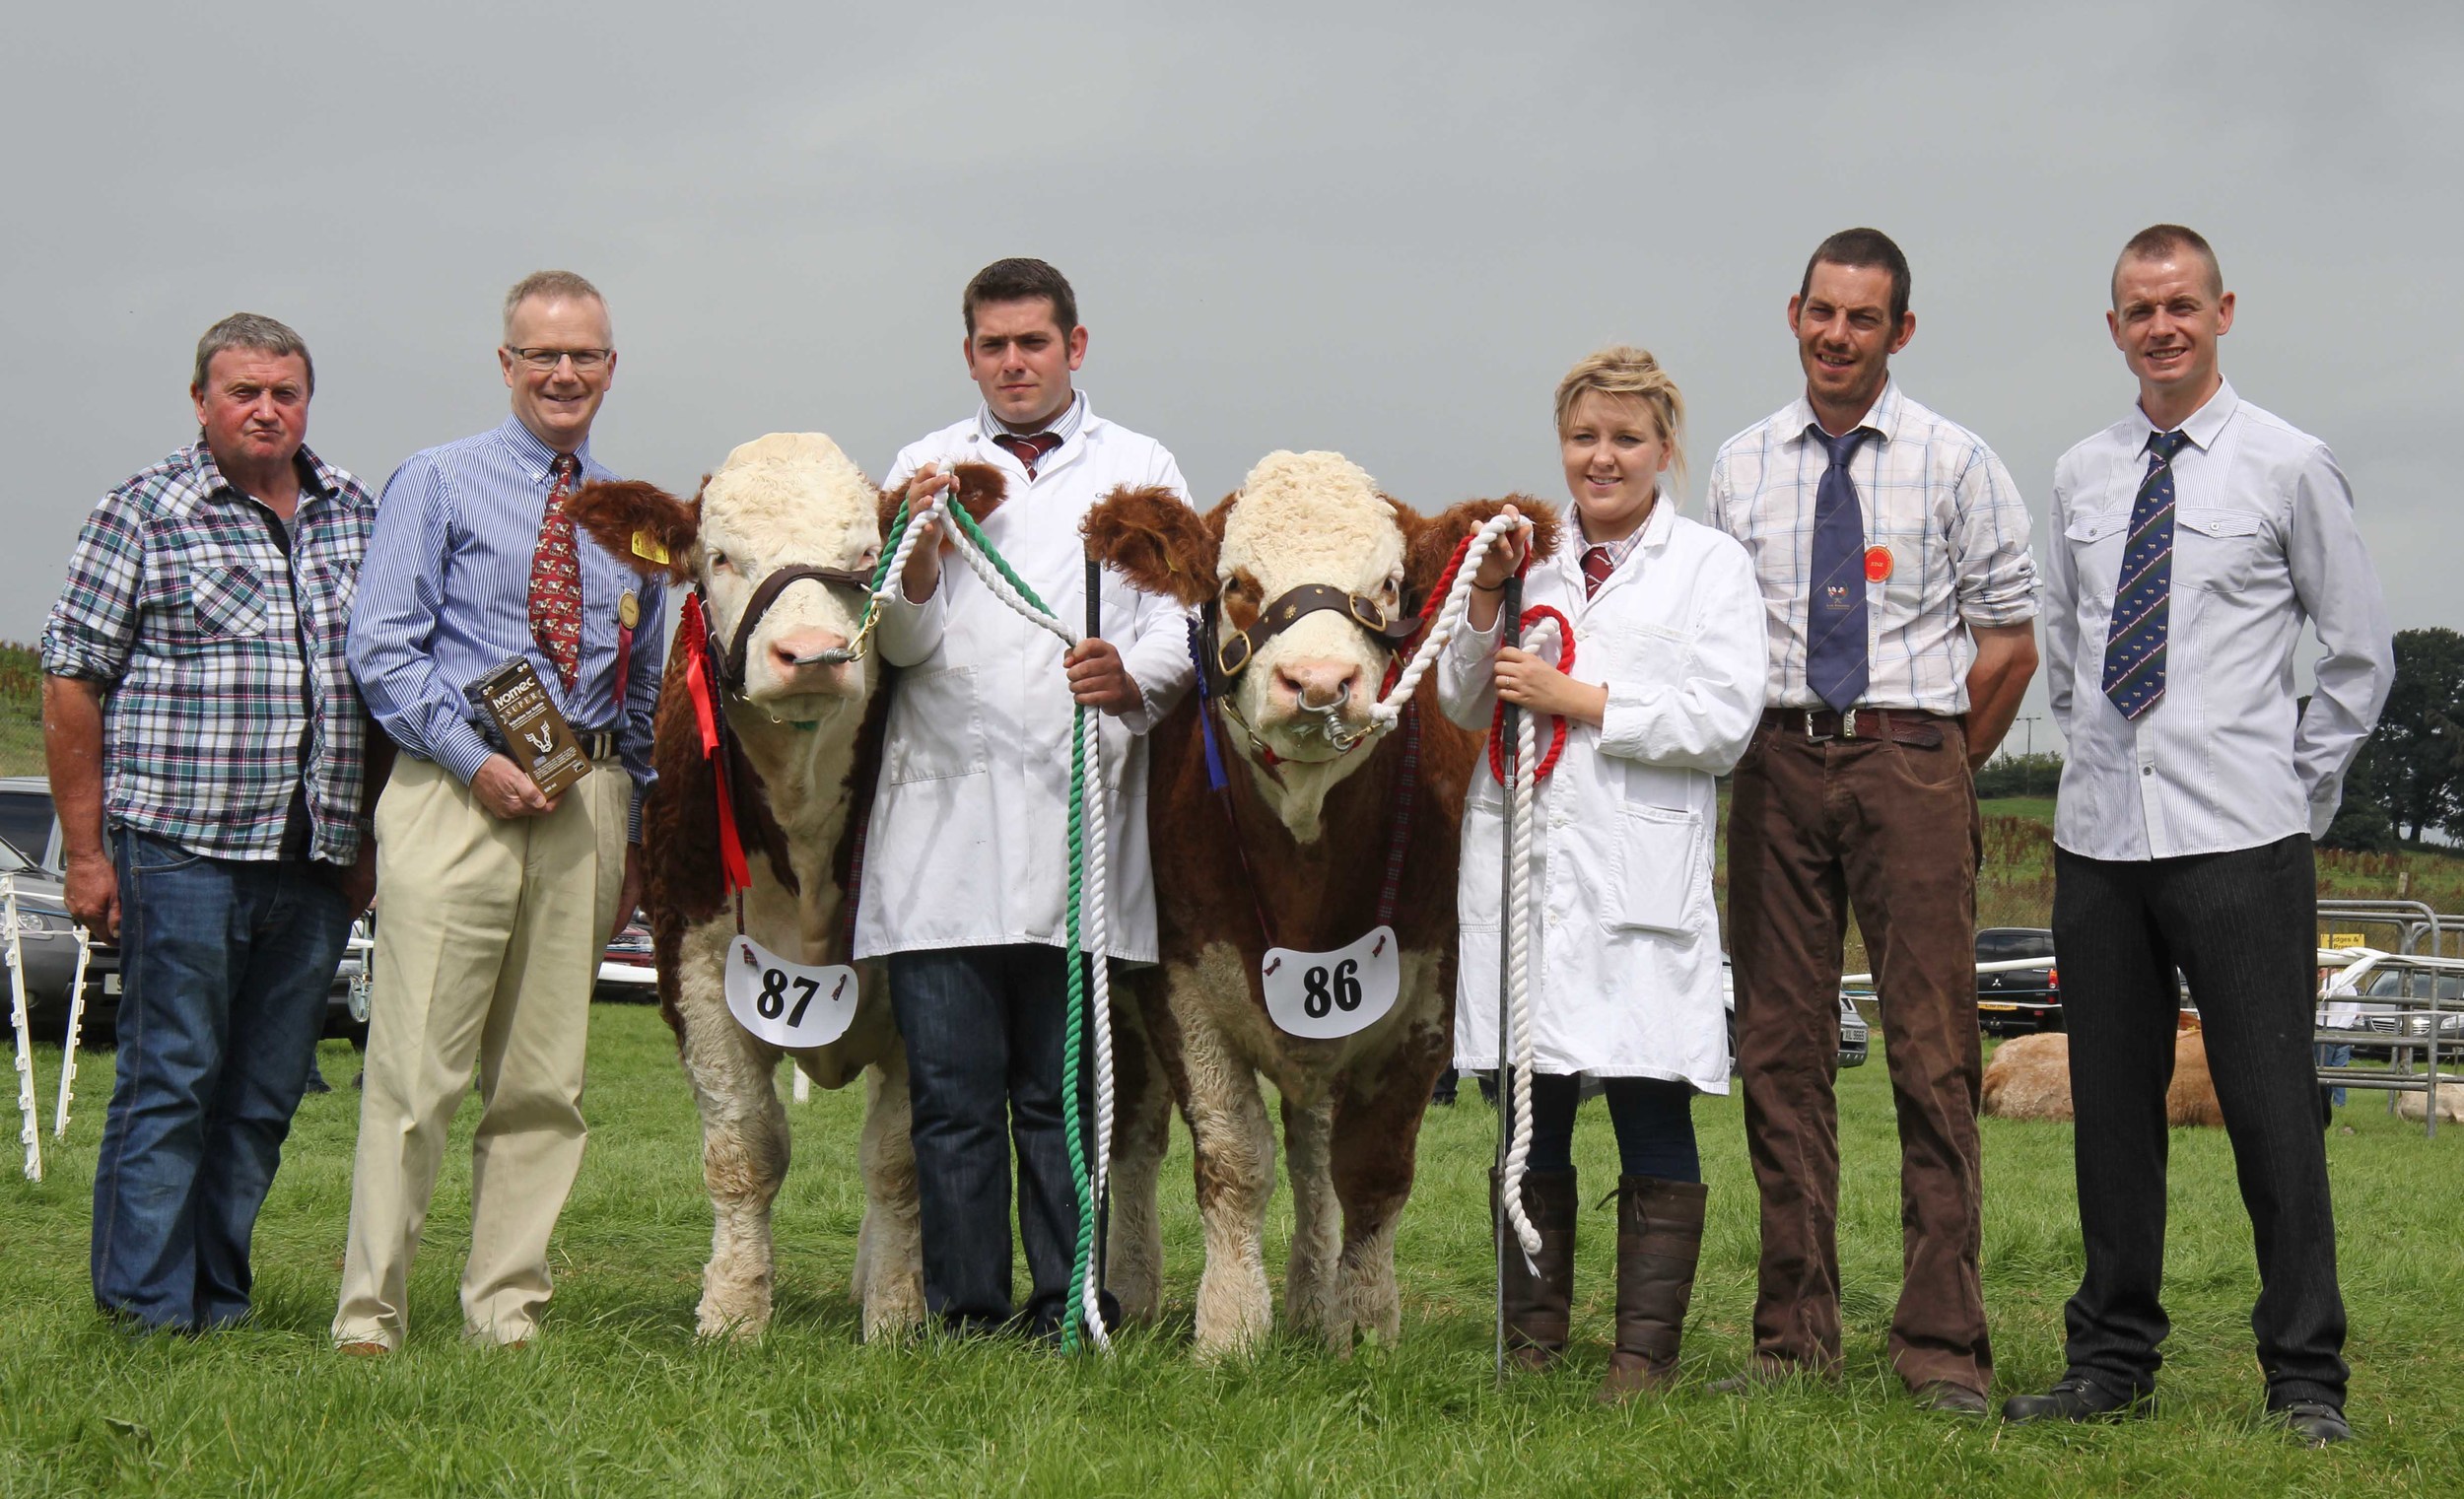 Ivomec Super Simmental Pair of the Year runners-up were Castlemount Bianca and Castlemount Modesty owned by Duncan McDowell, Newtownards, and shown by Richard McKeown and Fiona Sloan. Included are sponsor Philip Clarke, Merial Animal Health; judge Garrett Behan, Portlaoise; and NI Simmental Club chairman Richard Rodgers. 